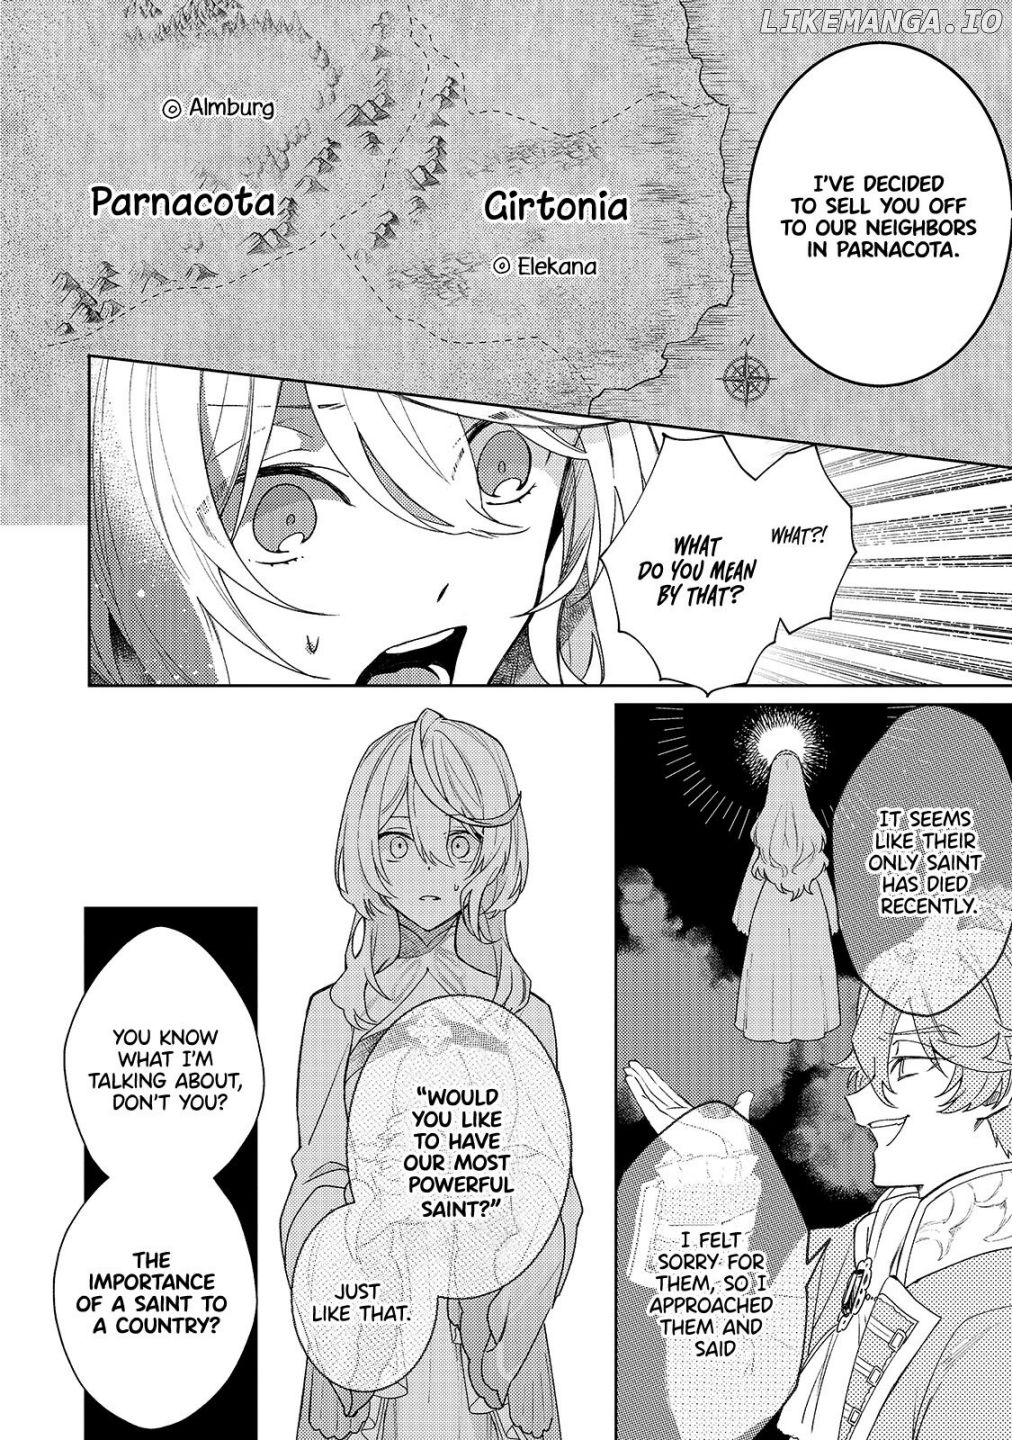 The Saint Whose Engagement Was Broken When She Became Too Perfect is Sold Off to a Neighboring Kingdom chapter 2.2 - page 6